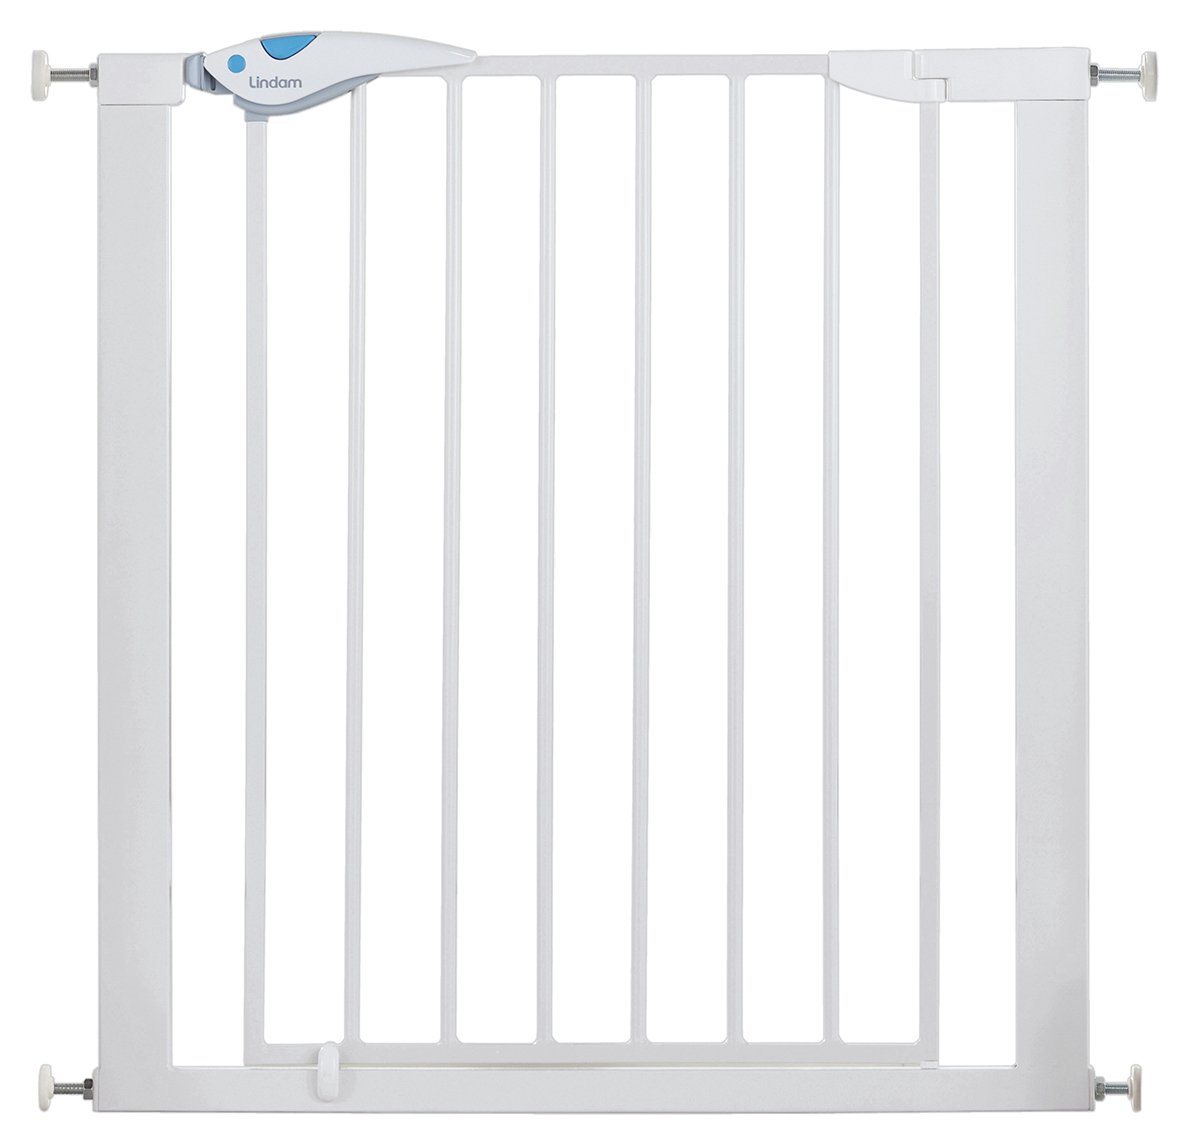 lindam extra wide stair gate